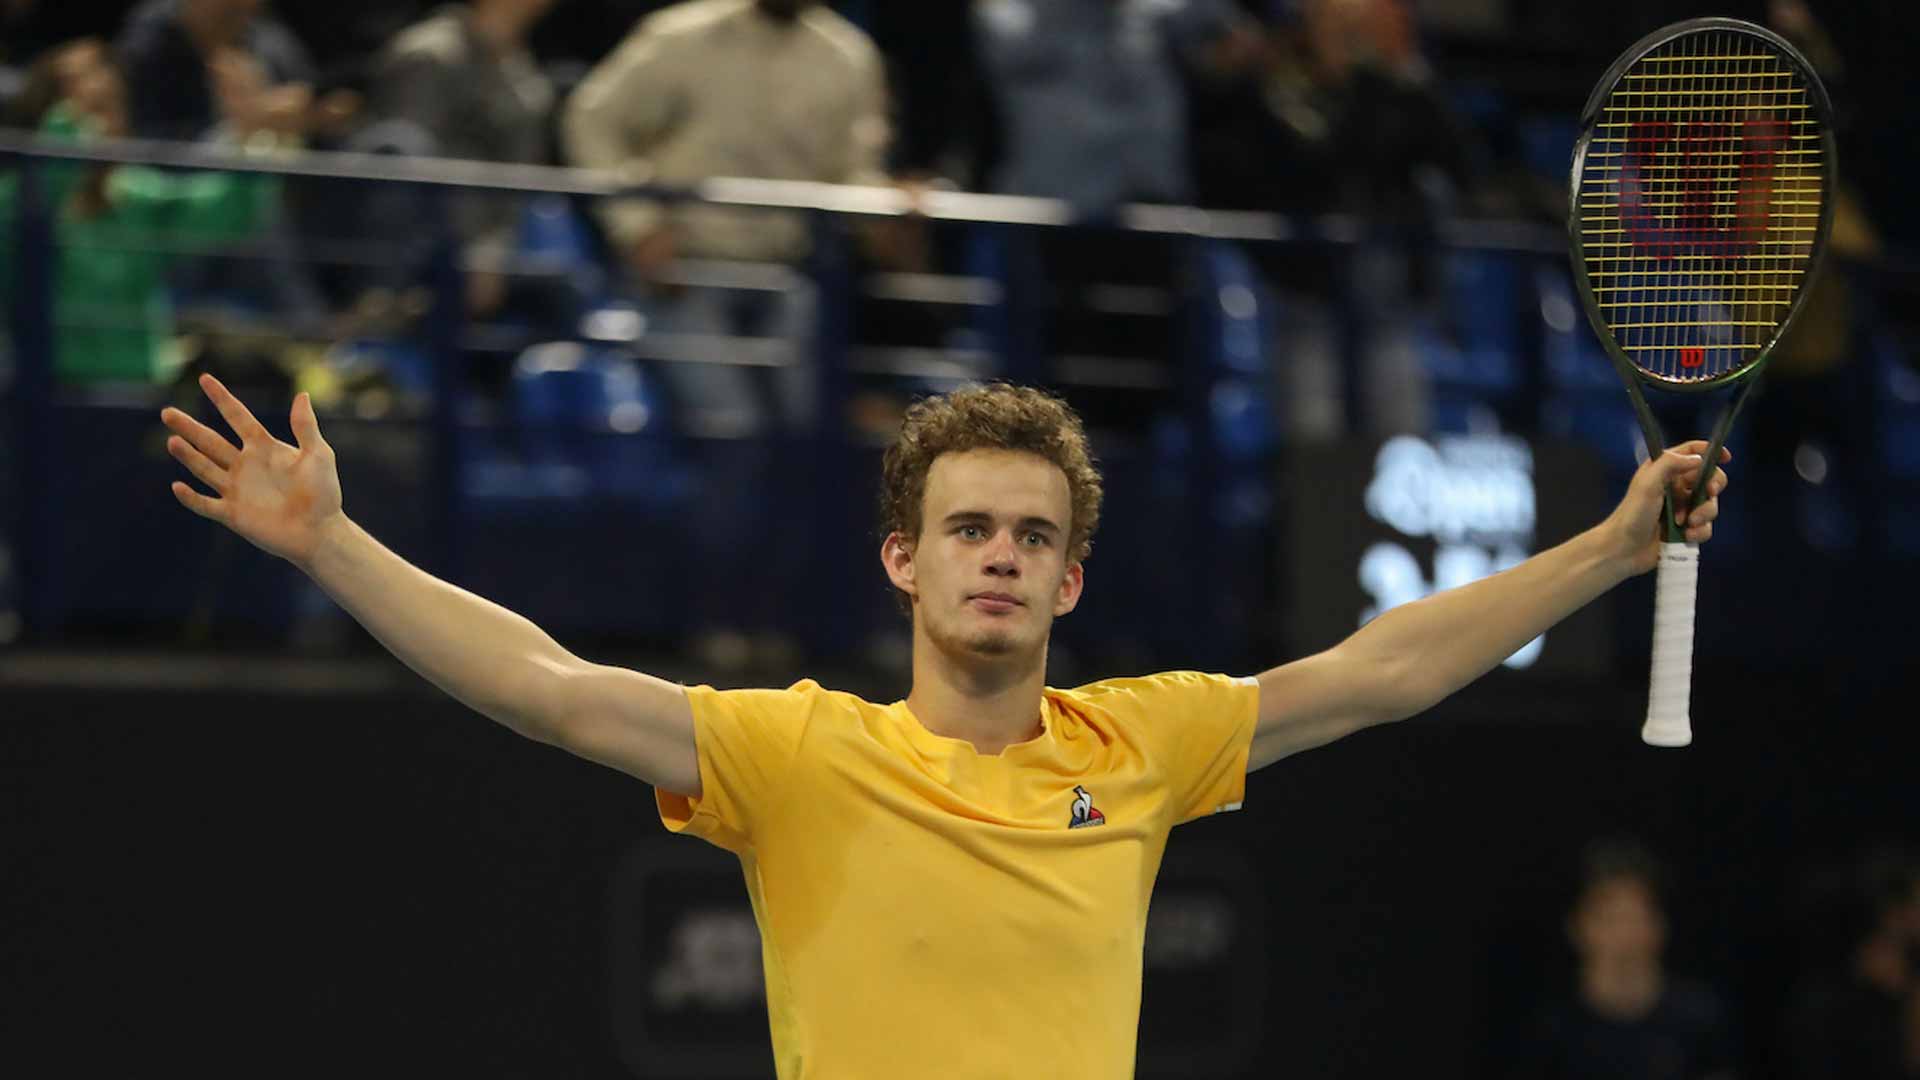 Luca Van Assche celebrates a thrilling final victory at the 2023 Pau Challenger.